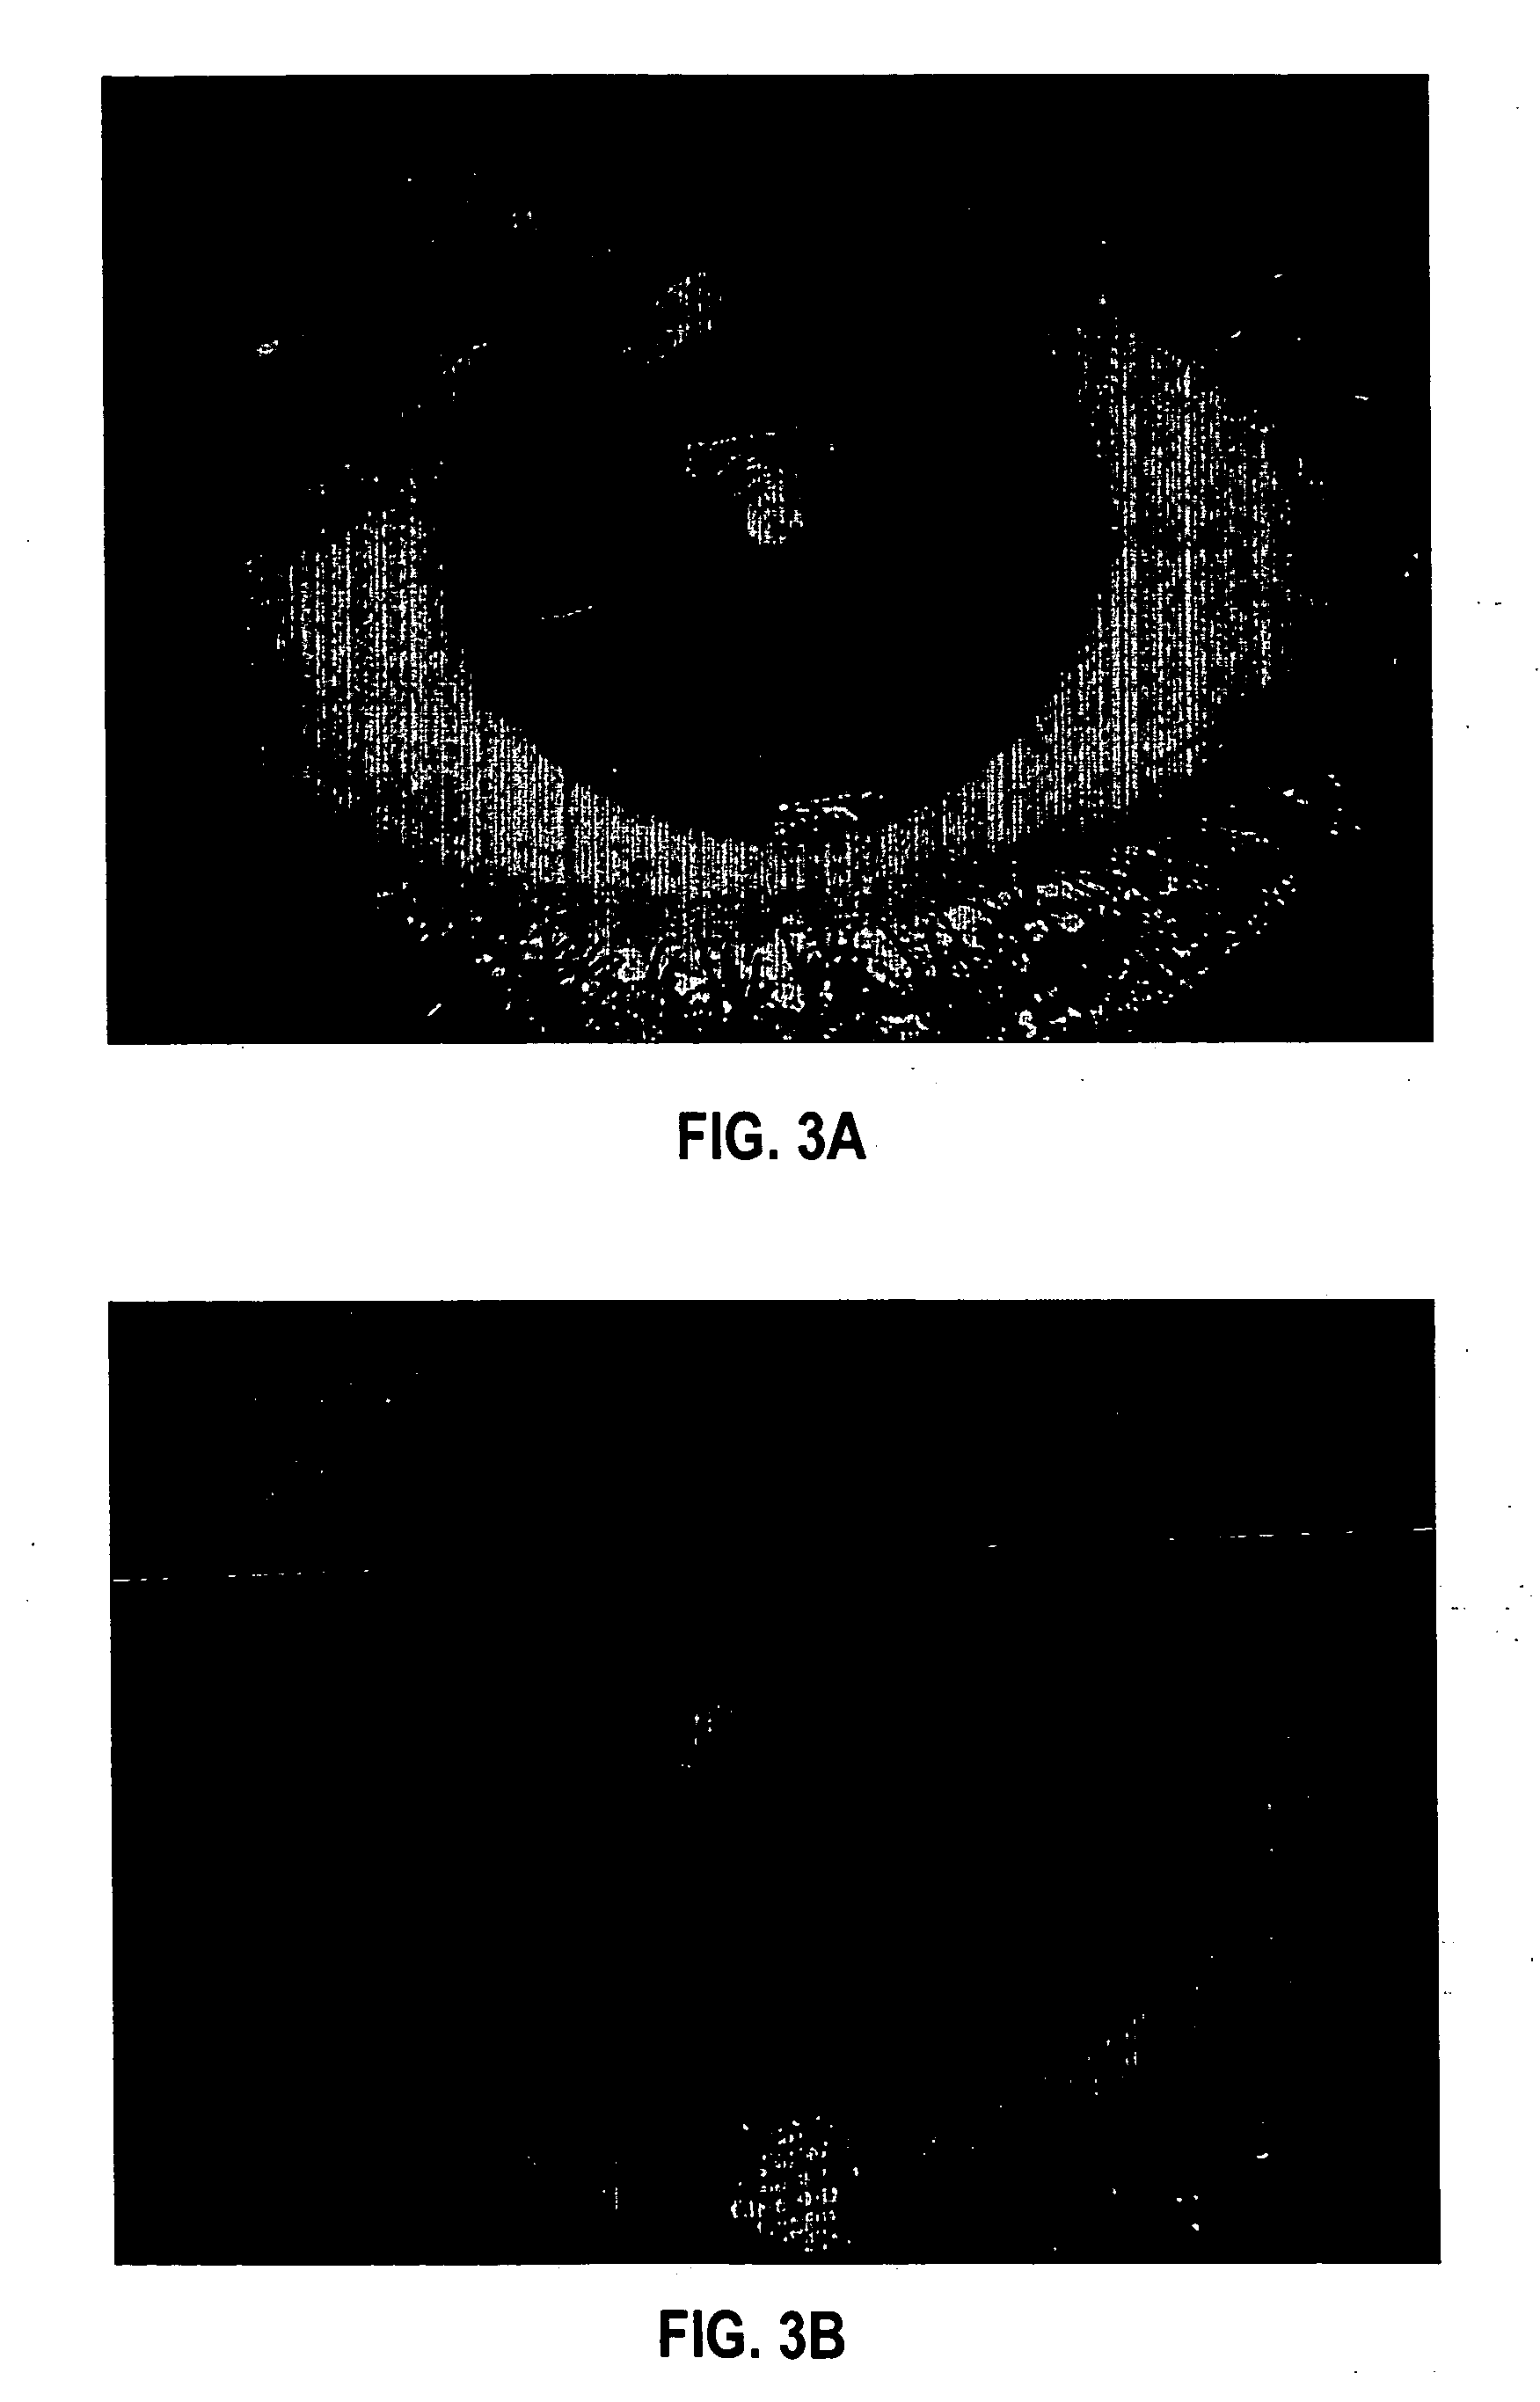 Formulation and method for administration of ophthalmologically active agents